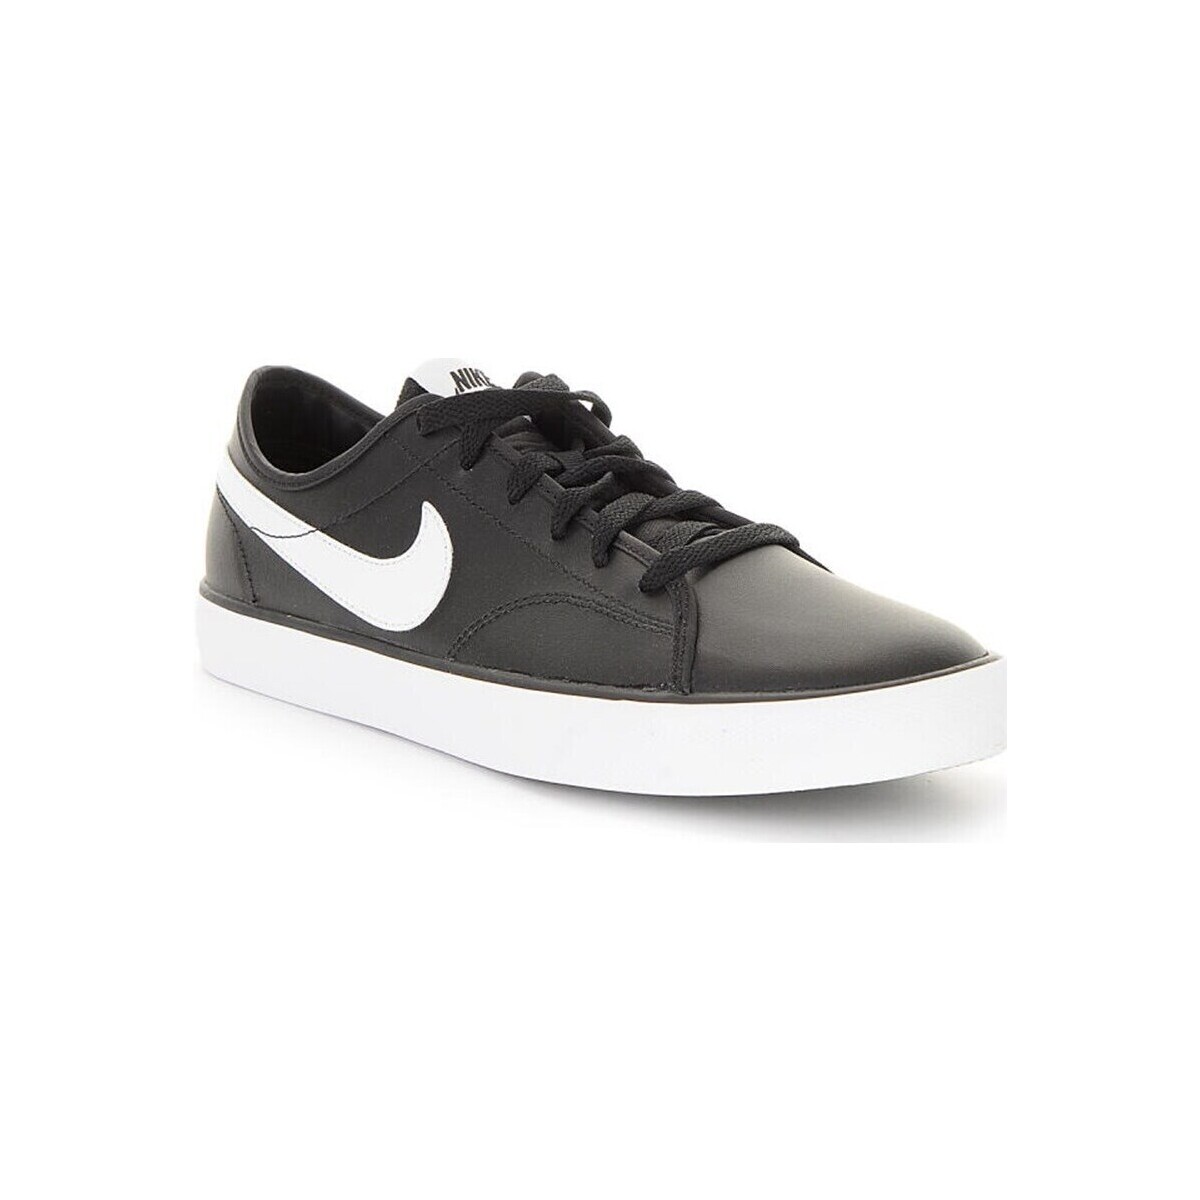 Shoes Men Low top trainers Nike Primo Court Leather Black, White